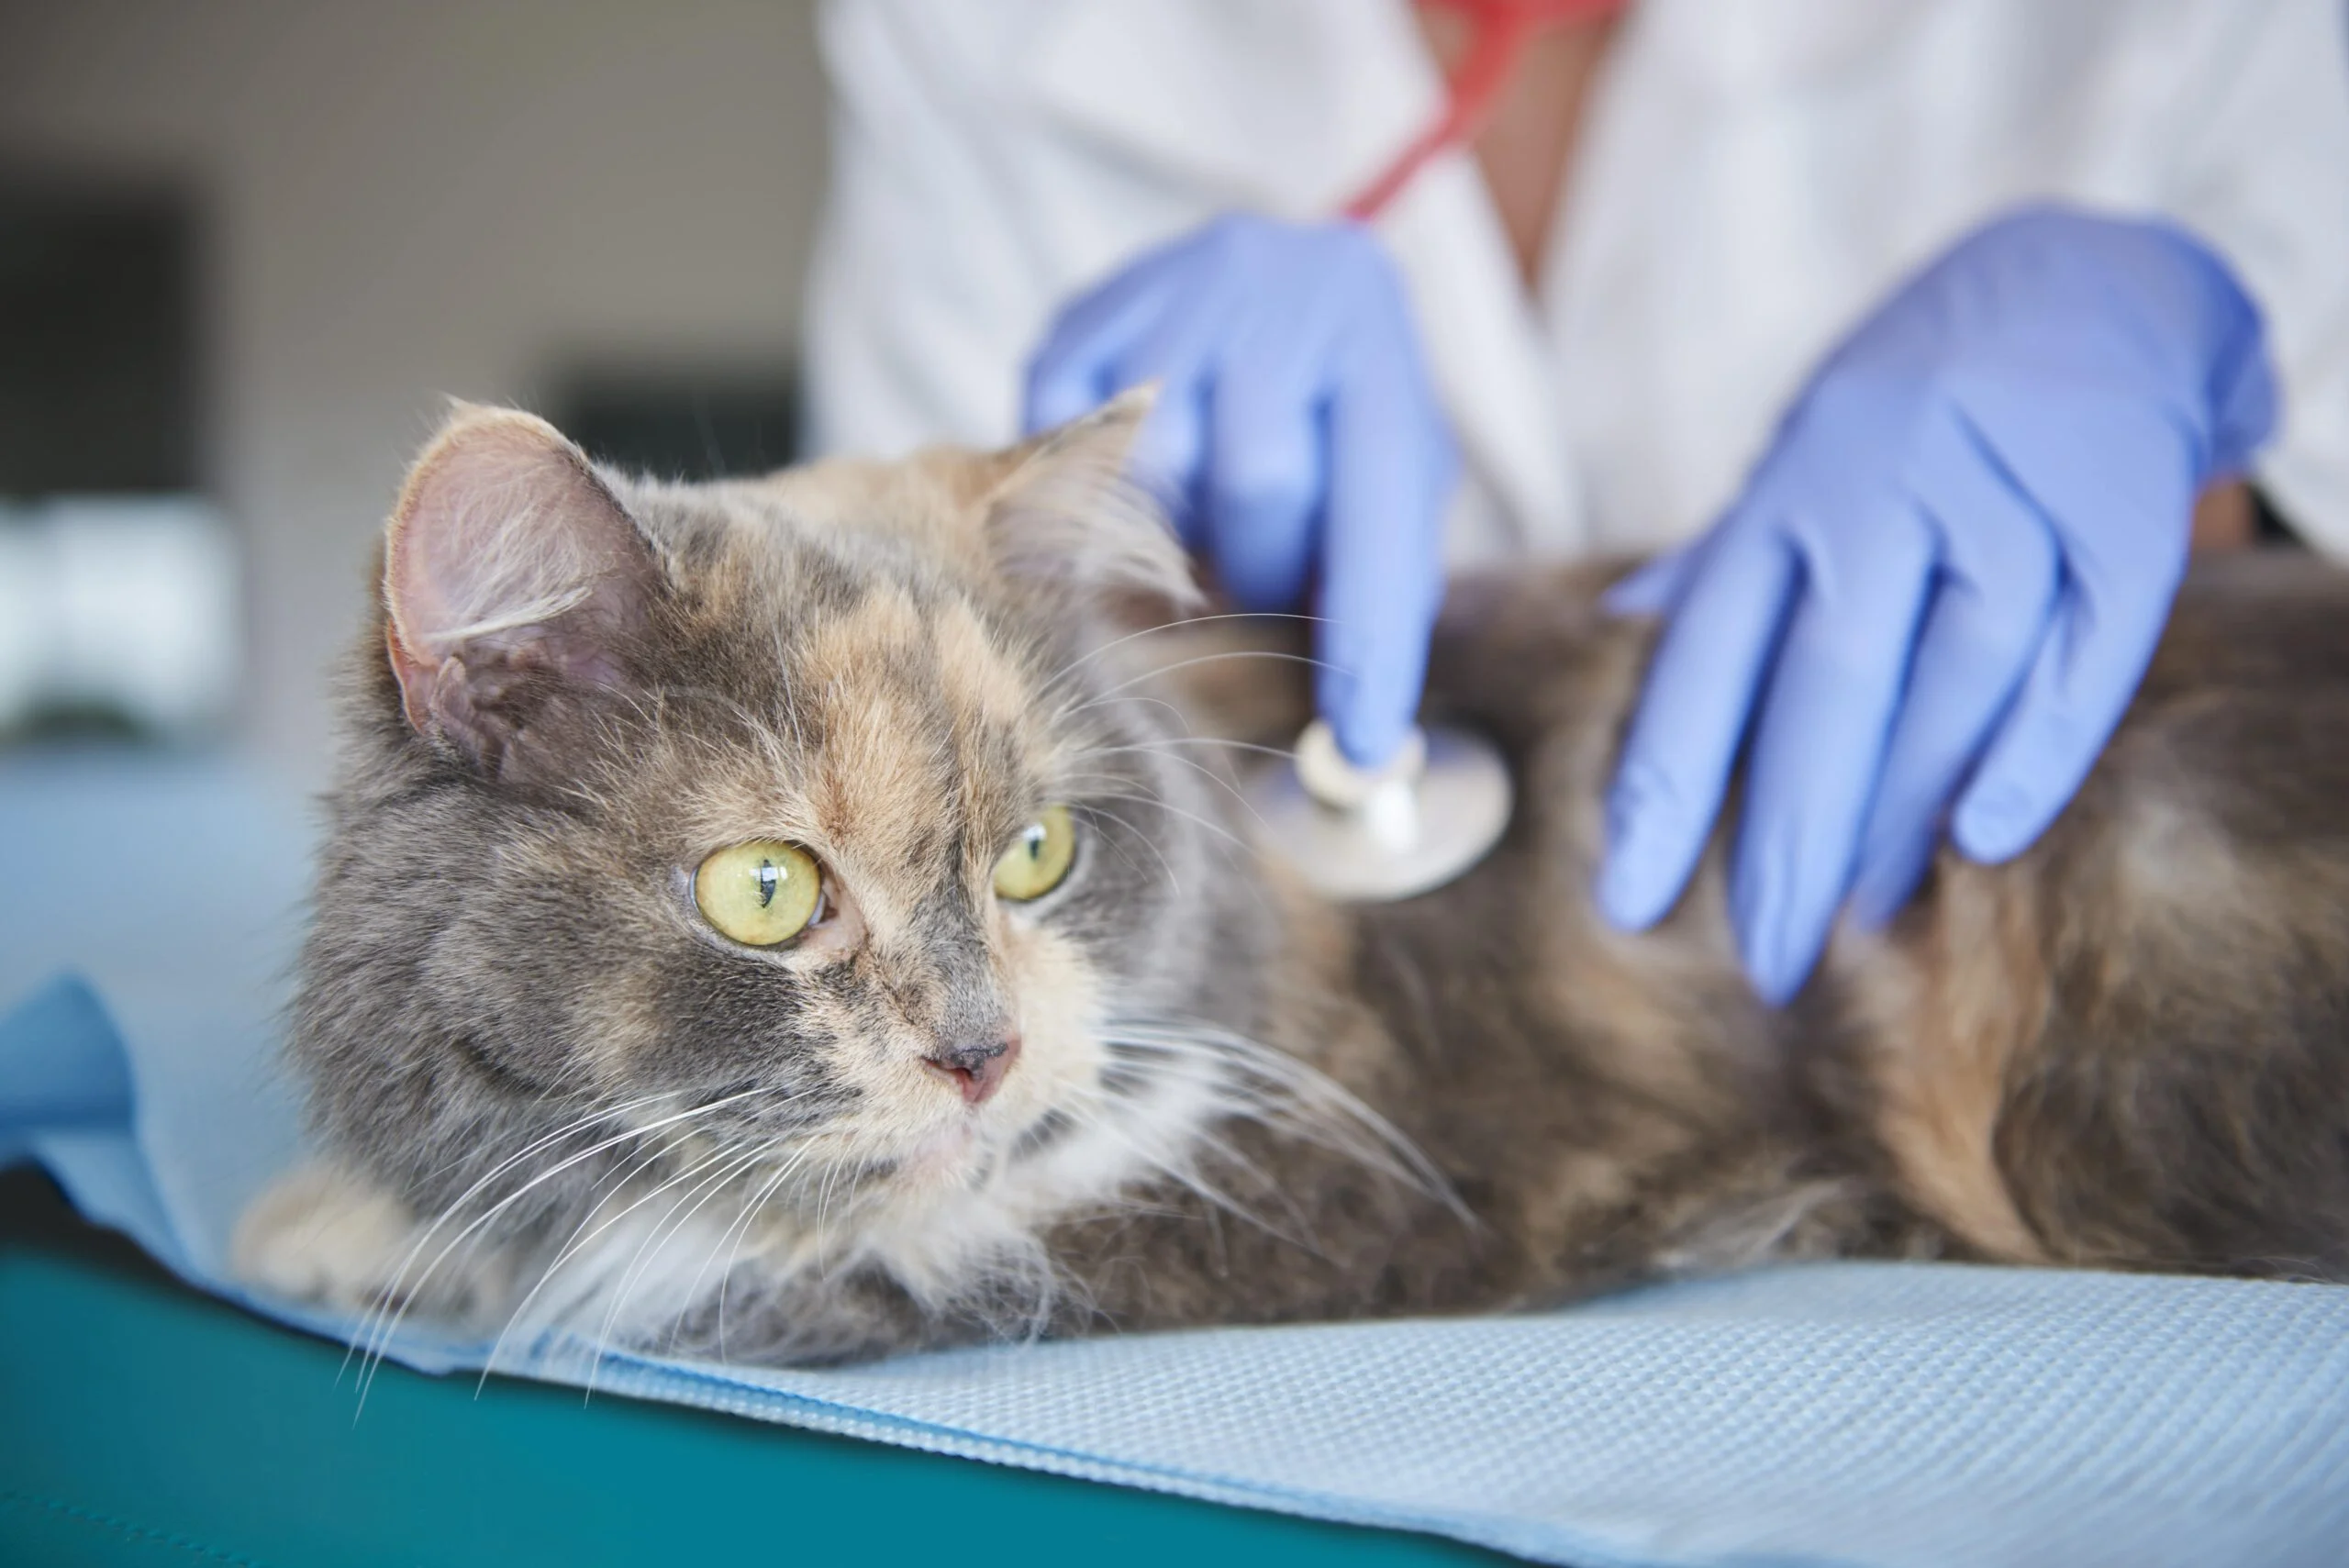 Things to Know Before Going to an Animal Hospital